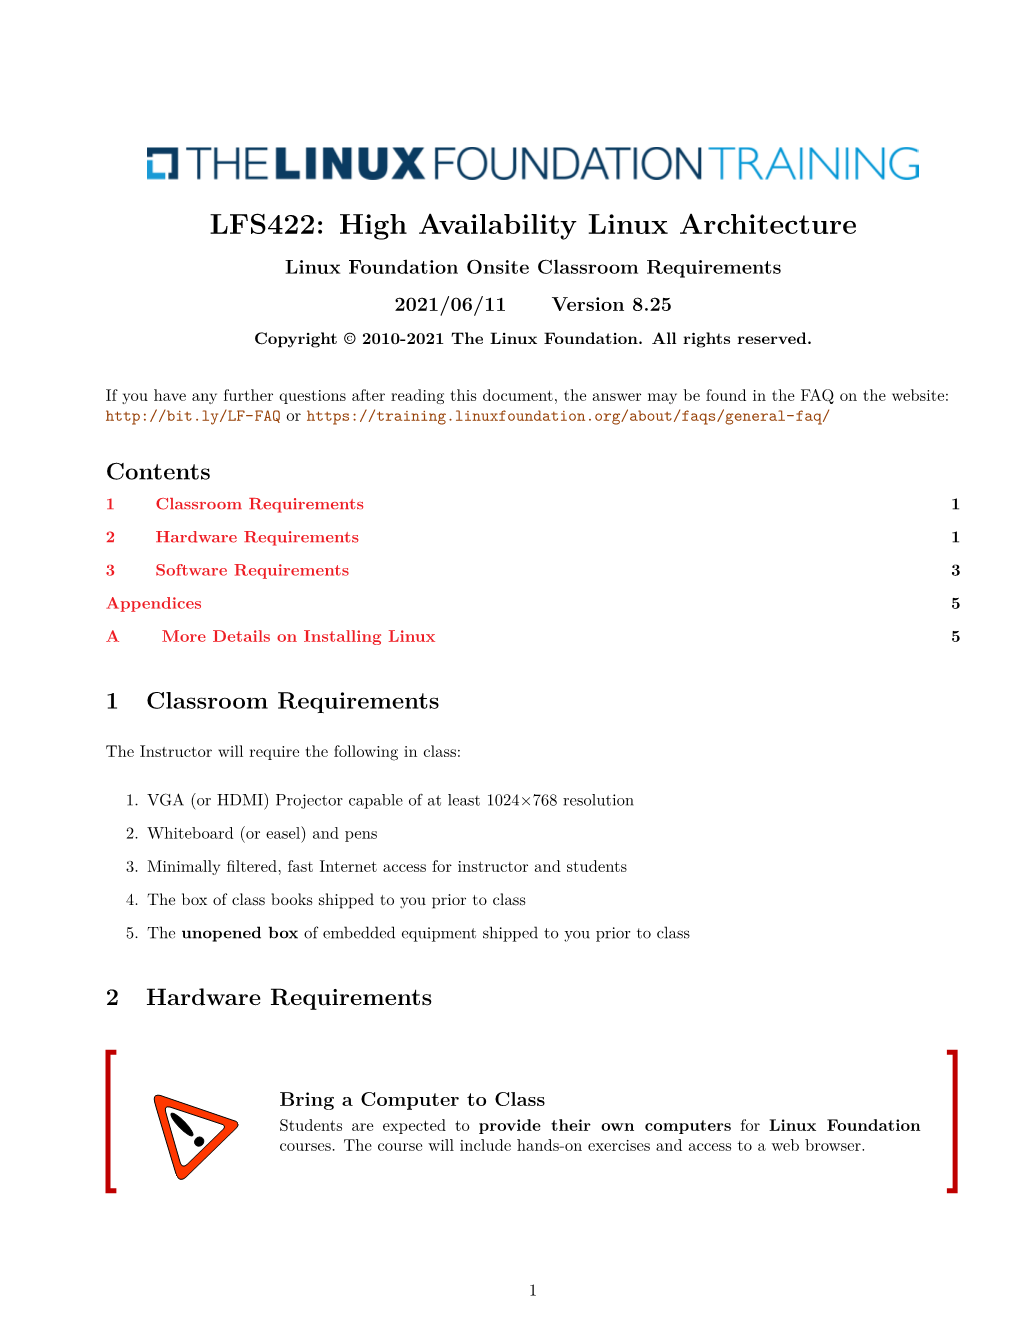 LFS422: High Availability Linux Architecture Linux Foundation Onsite Classroom Requirements 2021/06/11 Version 8.25 Copyright © 2010-2021 the Linux Foundation